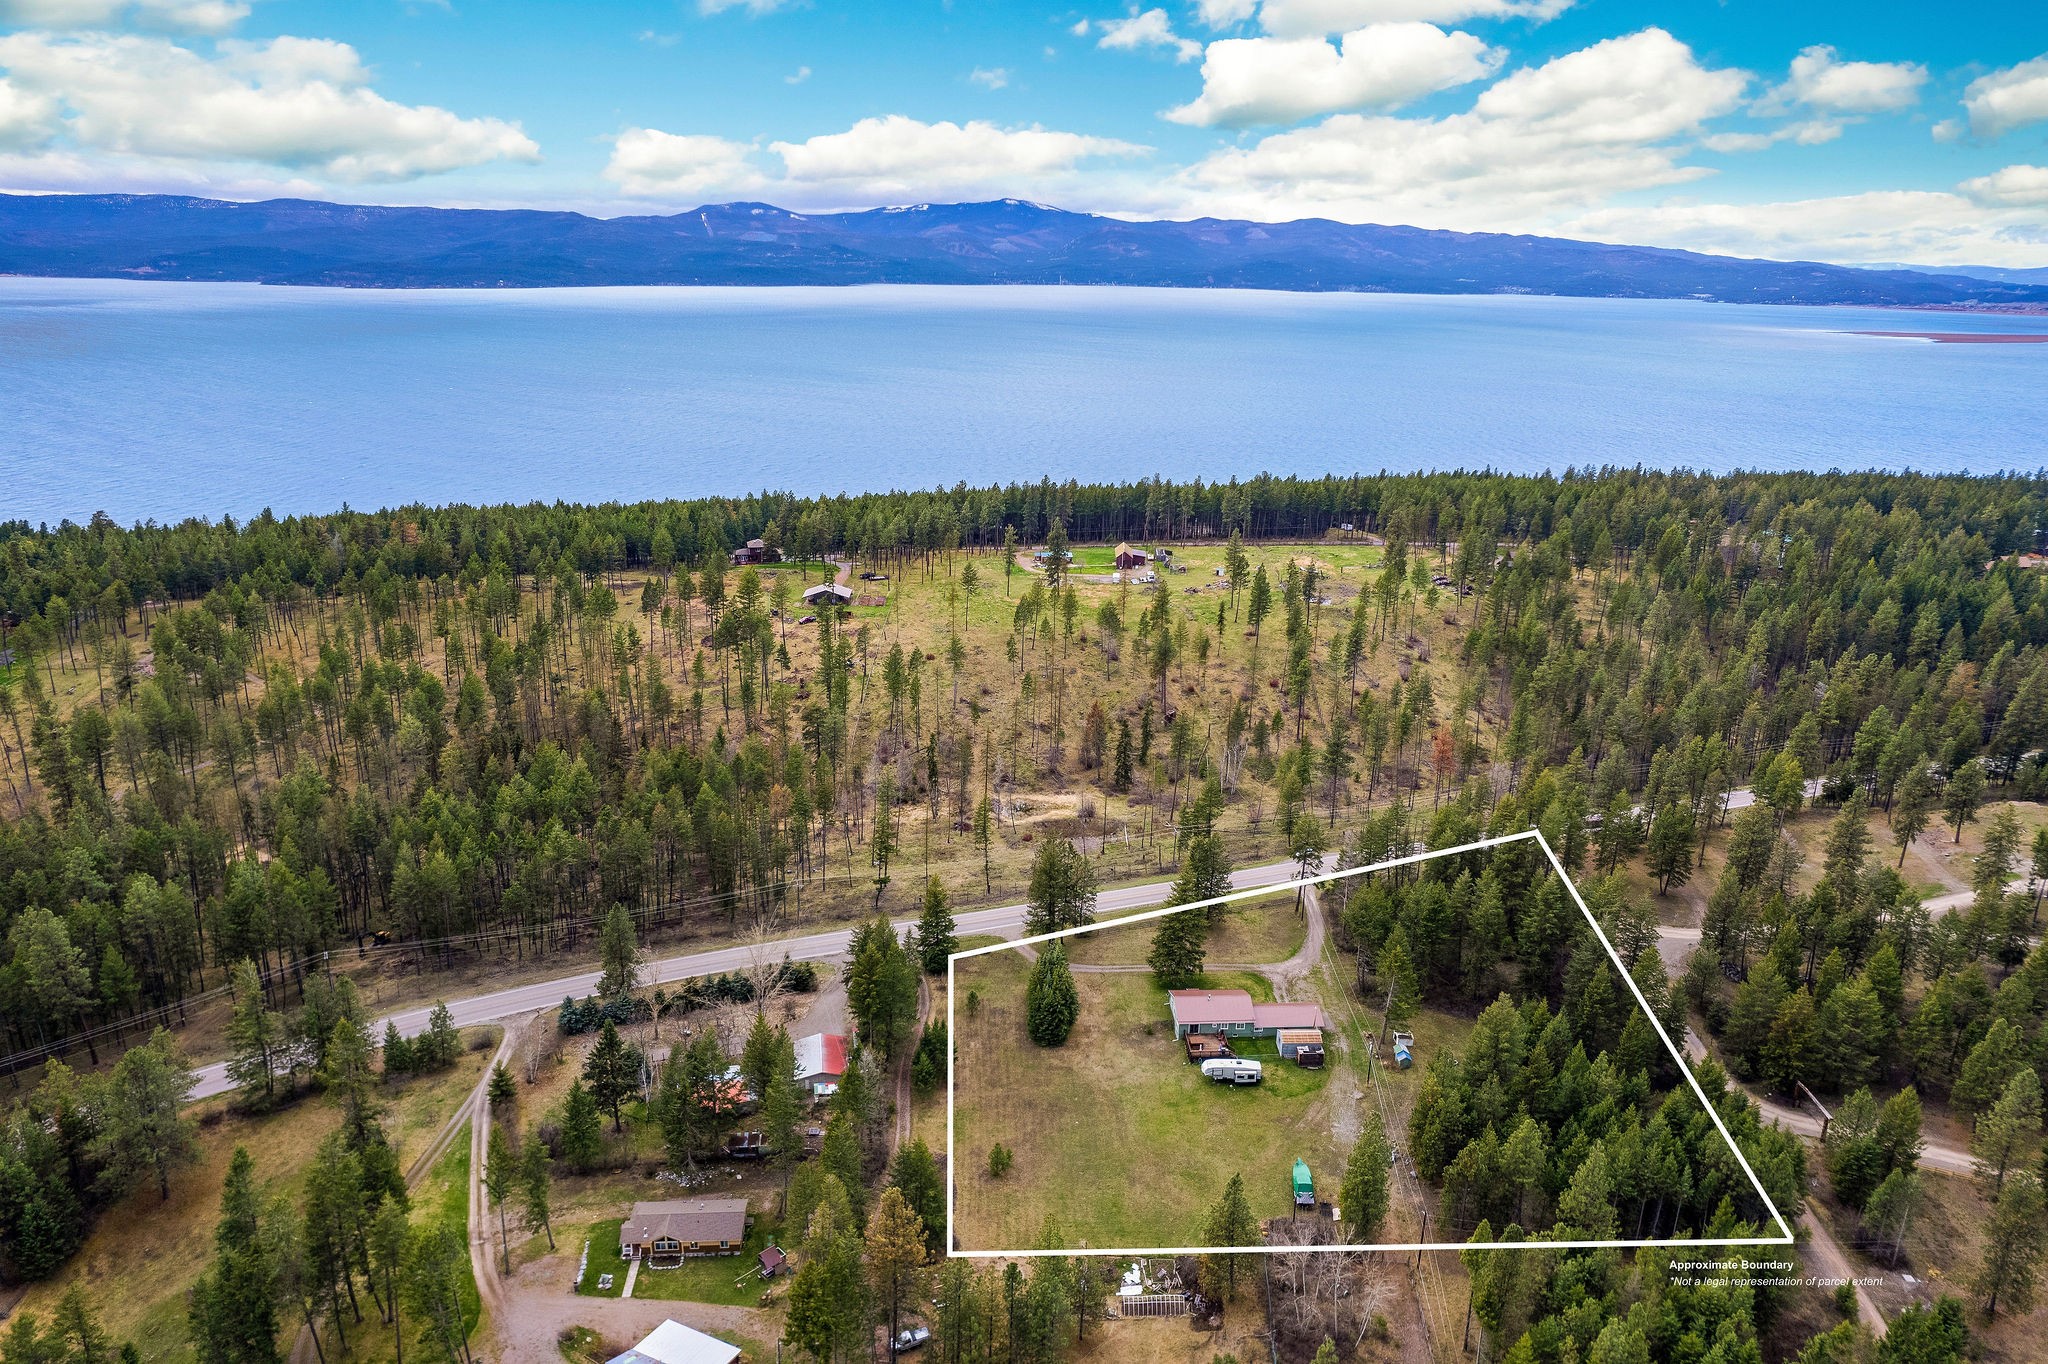 Beautiful opportunity to own a 3BD/3BA home on 3.54 level acres just steps away from Flathead Lake, the largest freshwater lake west of the Mississippi! This 2,455 finished SF home features main level living with a private back deck and hot tub and spacious yard for gatherings or animals. With no zoning, HOA, or CCRs this location makes for a prime investment opportunity to bring your vision to life, whether it’s building a guest cabin, tending cherry orchards, or raising farm animals. The 450 feet of Montana Hwy 35 frontage offers great visibility for any business opportunities. Minutes to Bigfork! Swan Lake, Echo Lake, Glacier National Park, Blacktail Ski Area, Whitefish Mountain Resort, Jewel Basin Recreational Area, and the Bob Marshall Wilderness nearby. Call Jennifer Shelley at 406.249.8929 or your real estate professional.